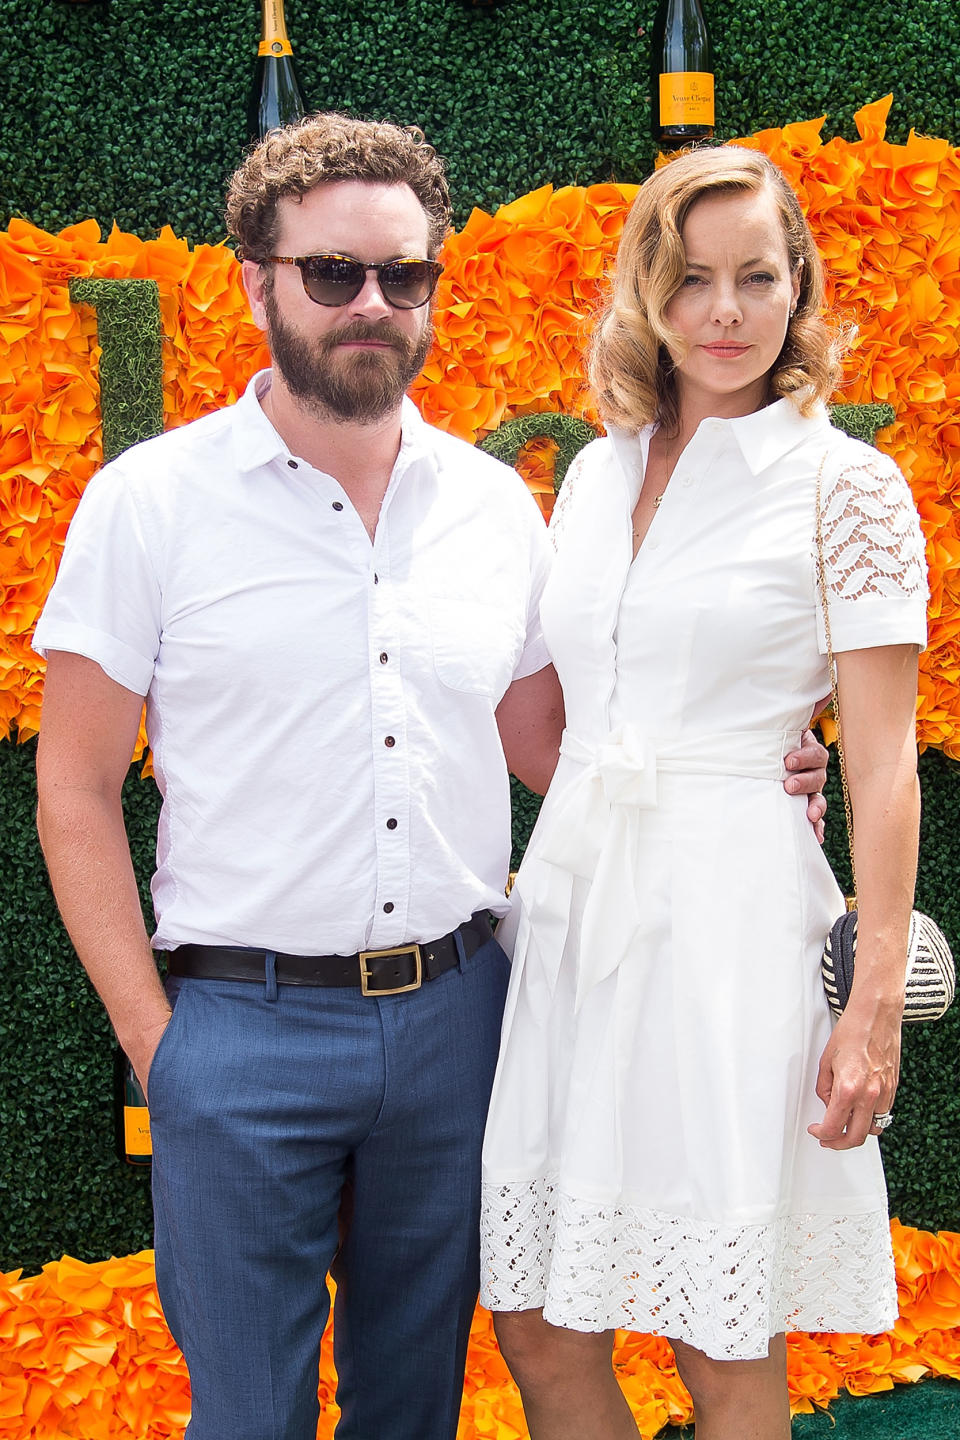 Actors Danny Masterson (L) and Bijou Phillips attend the 2016 Veuve Clicquot Polo Classic at Liberty State Park on June 4, 2016 in Jersey City, New Jersey.   (Michael Stewart / WireImage)